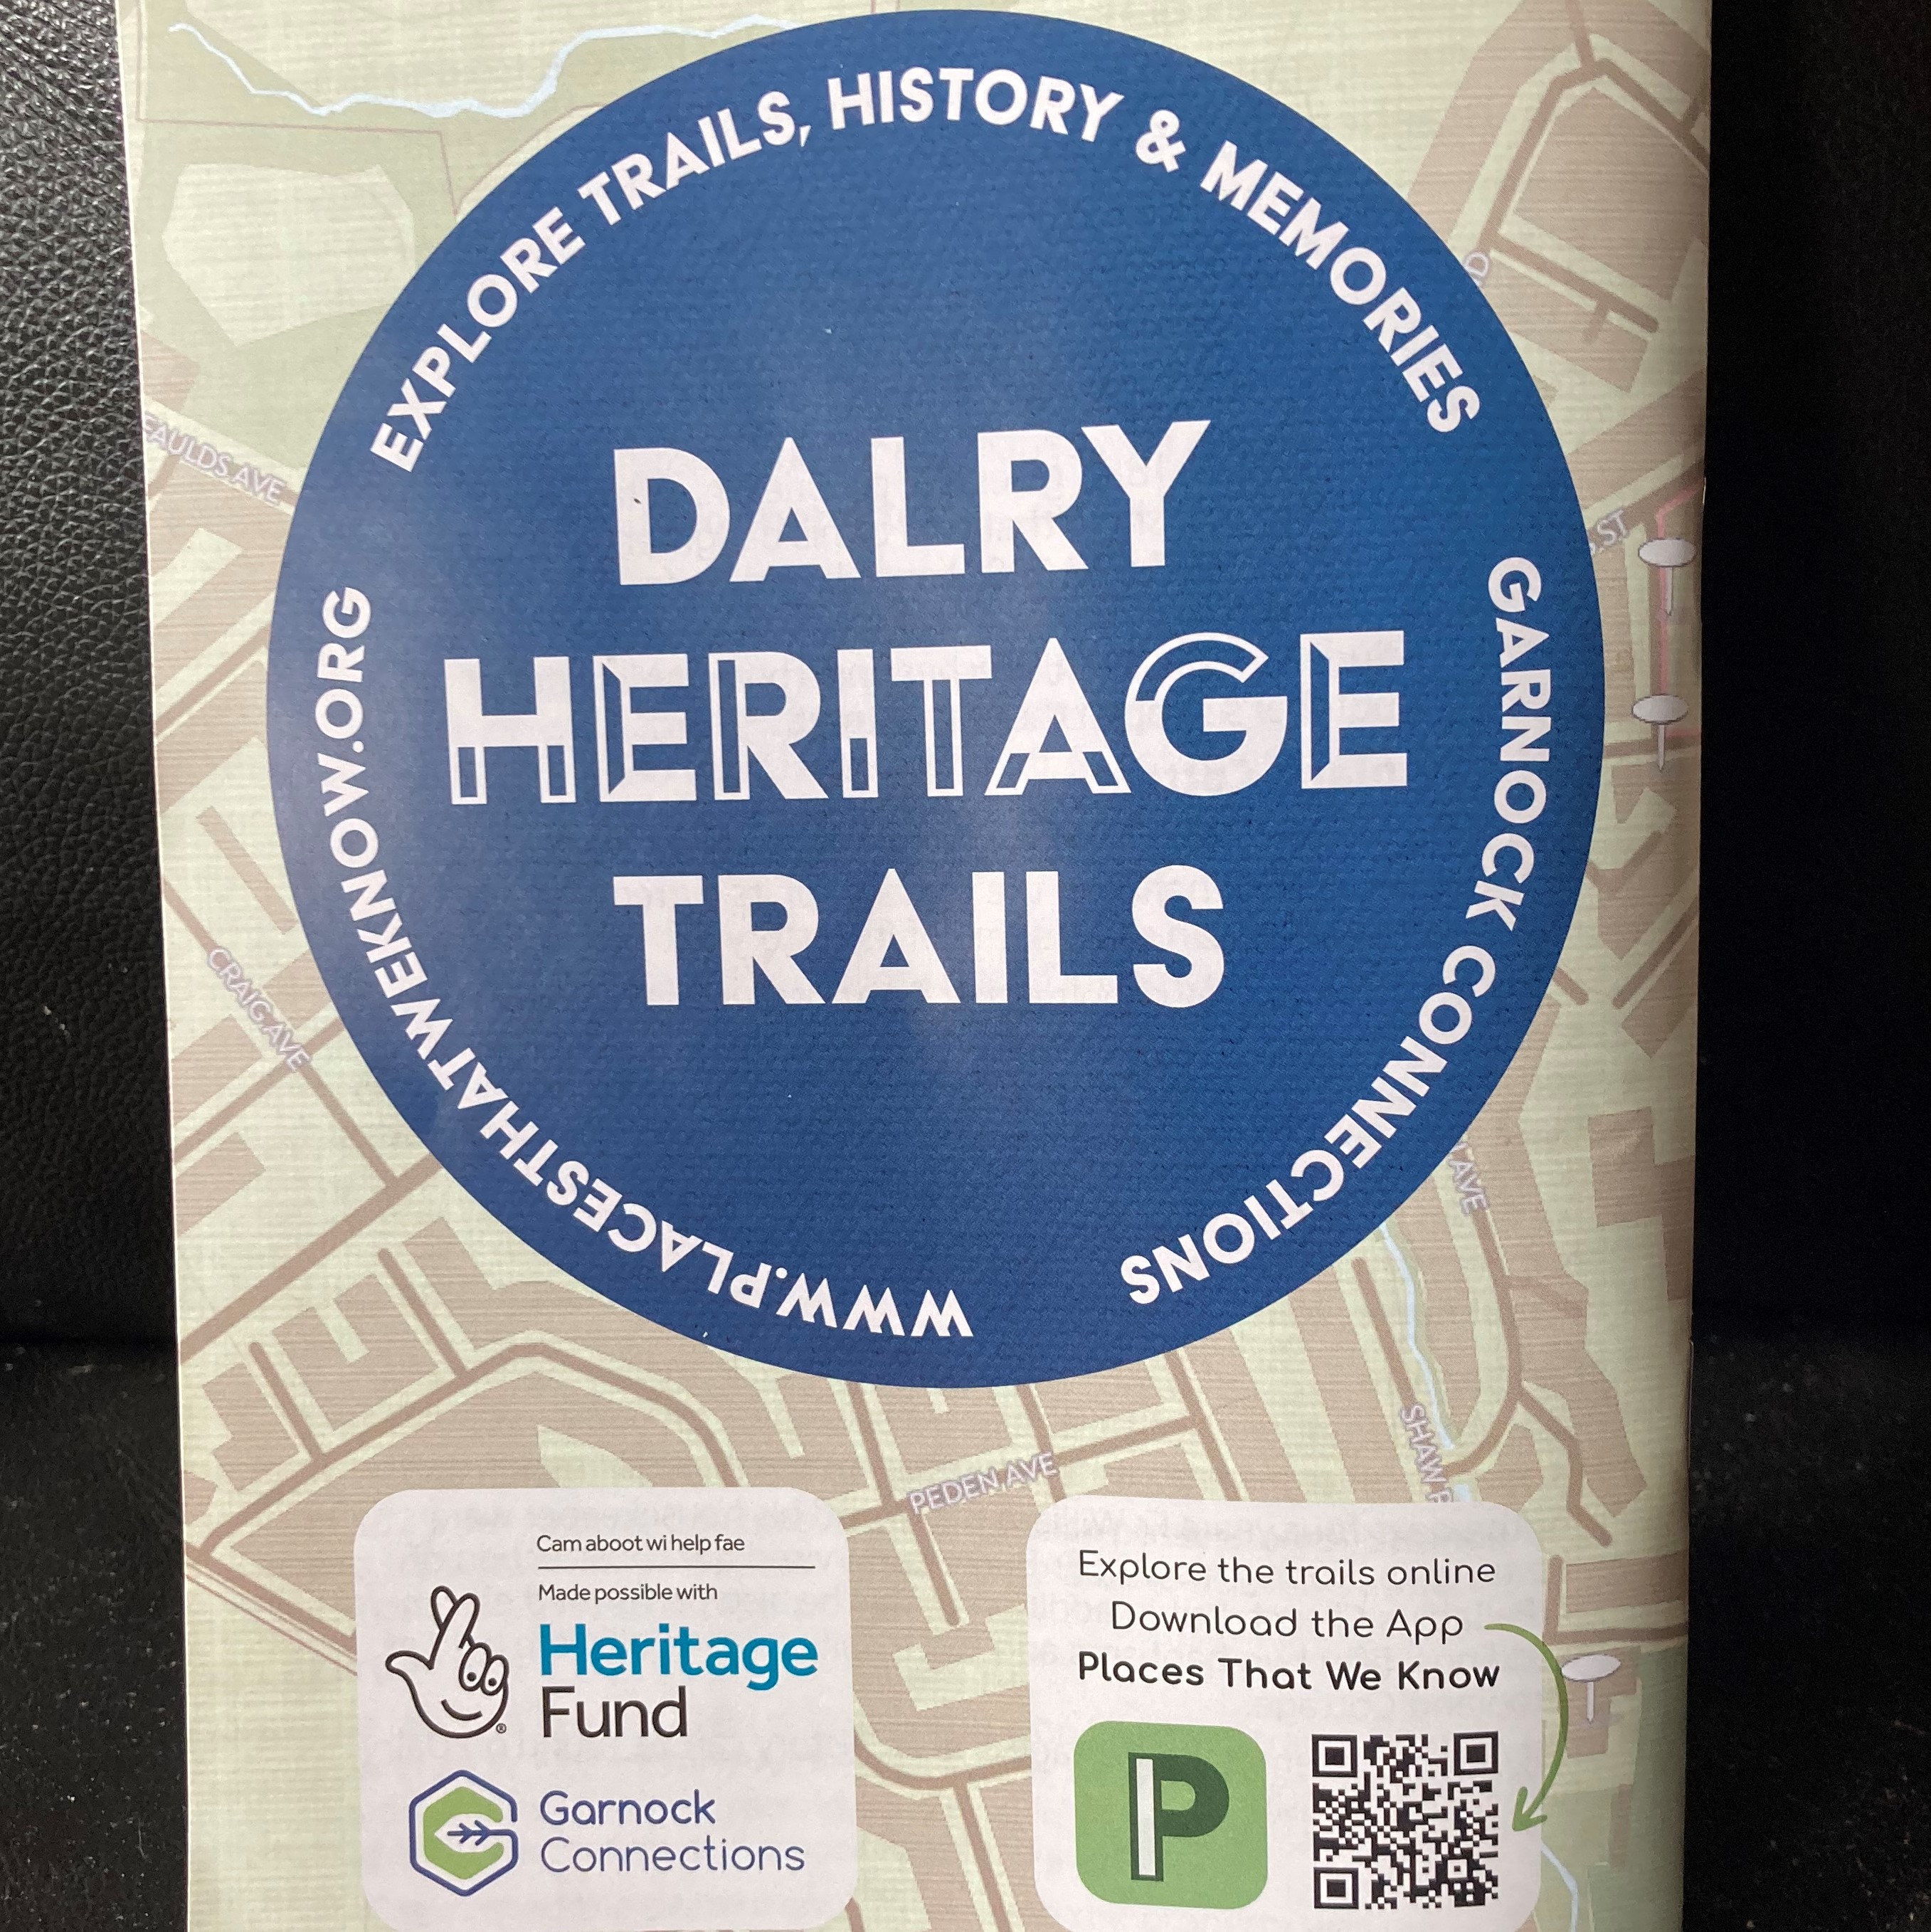 Heritage booklet of the Dalry Heritage Trails